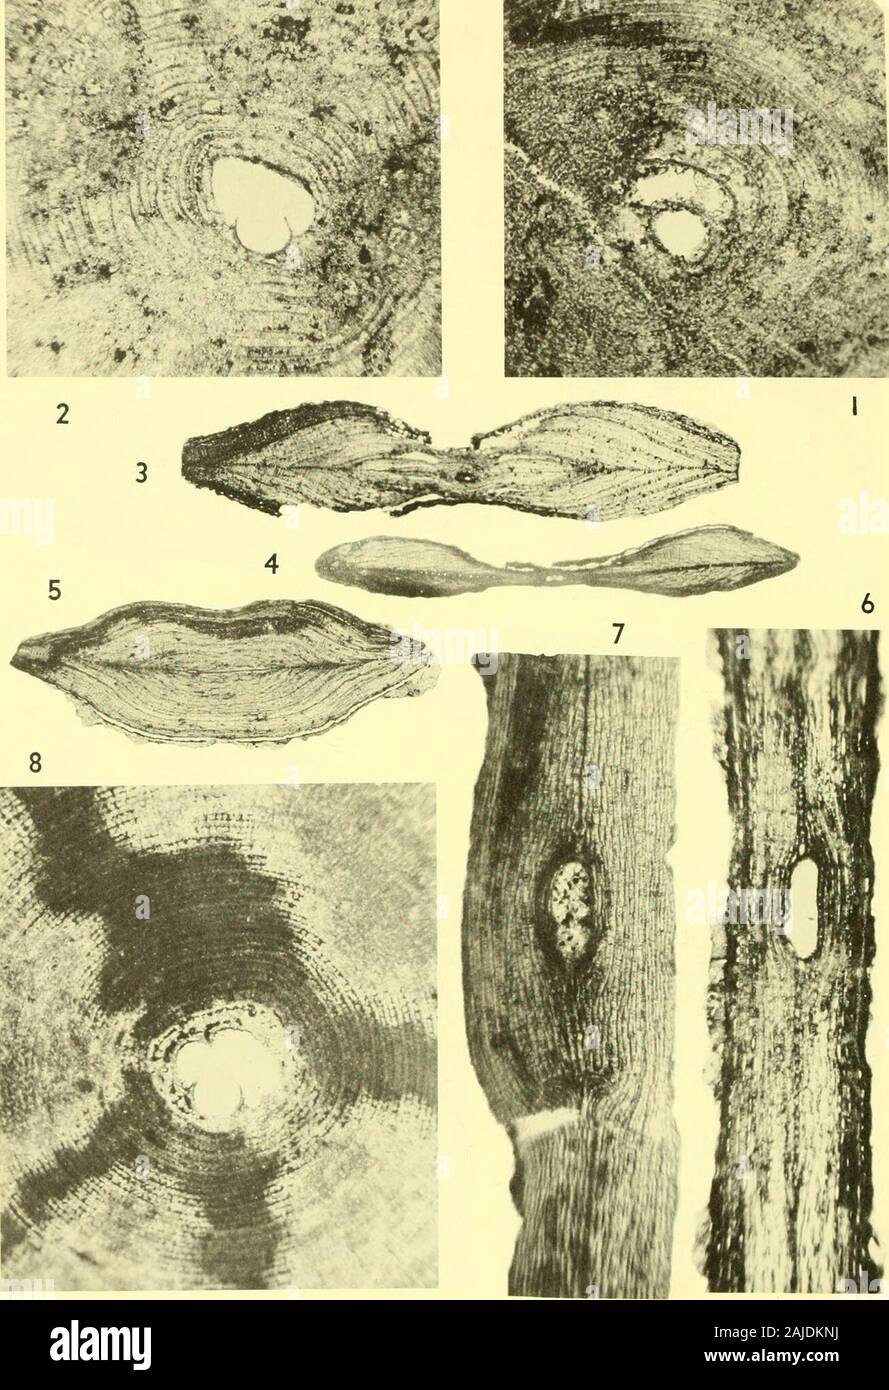 Bulletins of American paleontology . *:/ ^*4t^v. Bull. Amer. Paleont., Vol. 56 Plate.. Eocene Pseudophracminids: Cole 51 Explanation of Plate 8 Figure Page Figures 1, 2, 6-8. x 40; 3-5, x 12.5 1-8. Pseudophragmina (Athecocyclina) advena (Cushman) 10, 13, 25, 26, 27, 28 1,2,8. Parts of c(|ual()rial sections. 1. Spctinicn idcntiticcl asPseudoplnaginiiui (PiolxitocycUua) perkiusi (Vaughan) byCole {in Cole and Ap|)lin, 1964, p. 28). 2. Specimen identifiedby the late D. VV. (iravcll as this species. 8. Topotype ofDiscocycUna cloptoiii Vaughan. 3-5. Vertical sections of topo-types with slitlike cavi Stock Photo